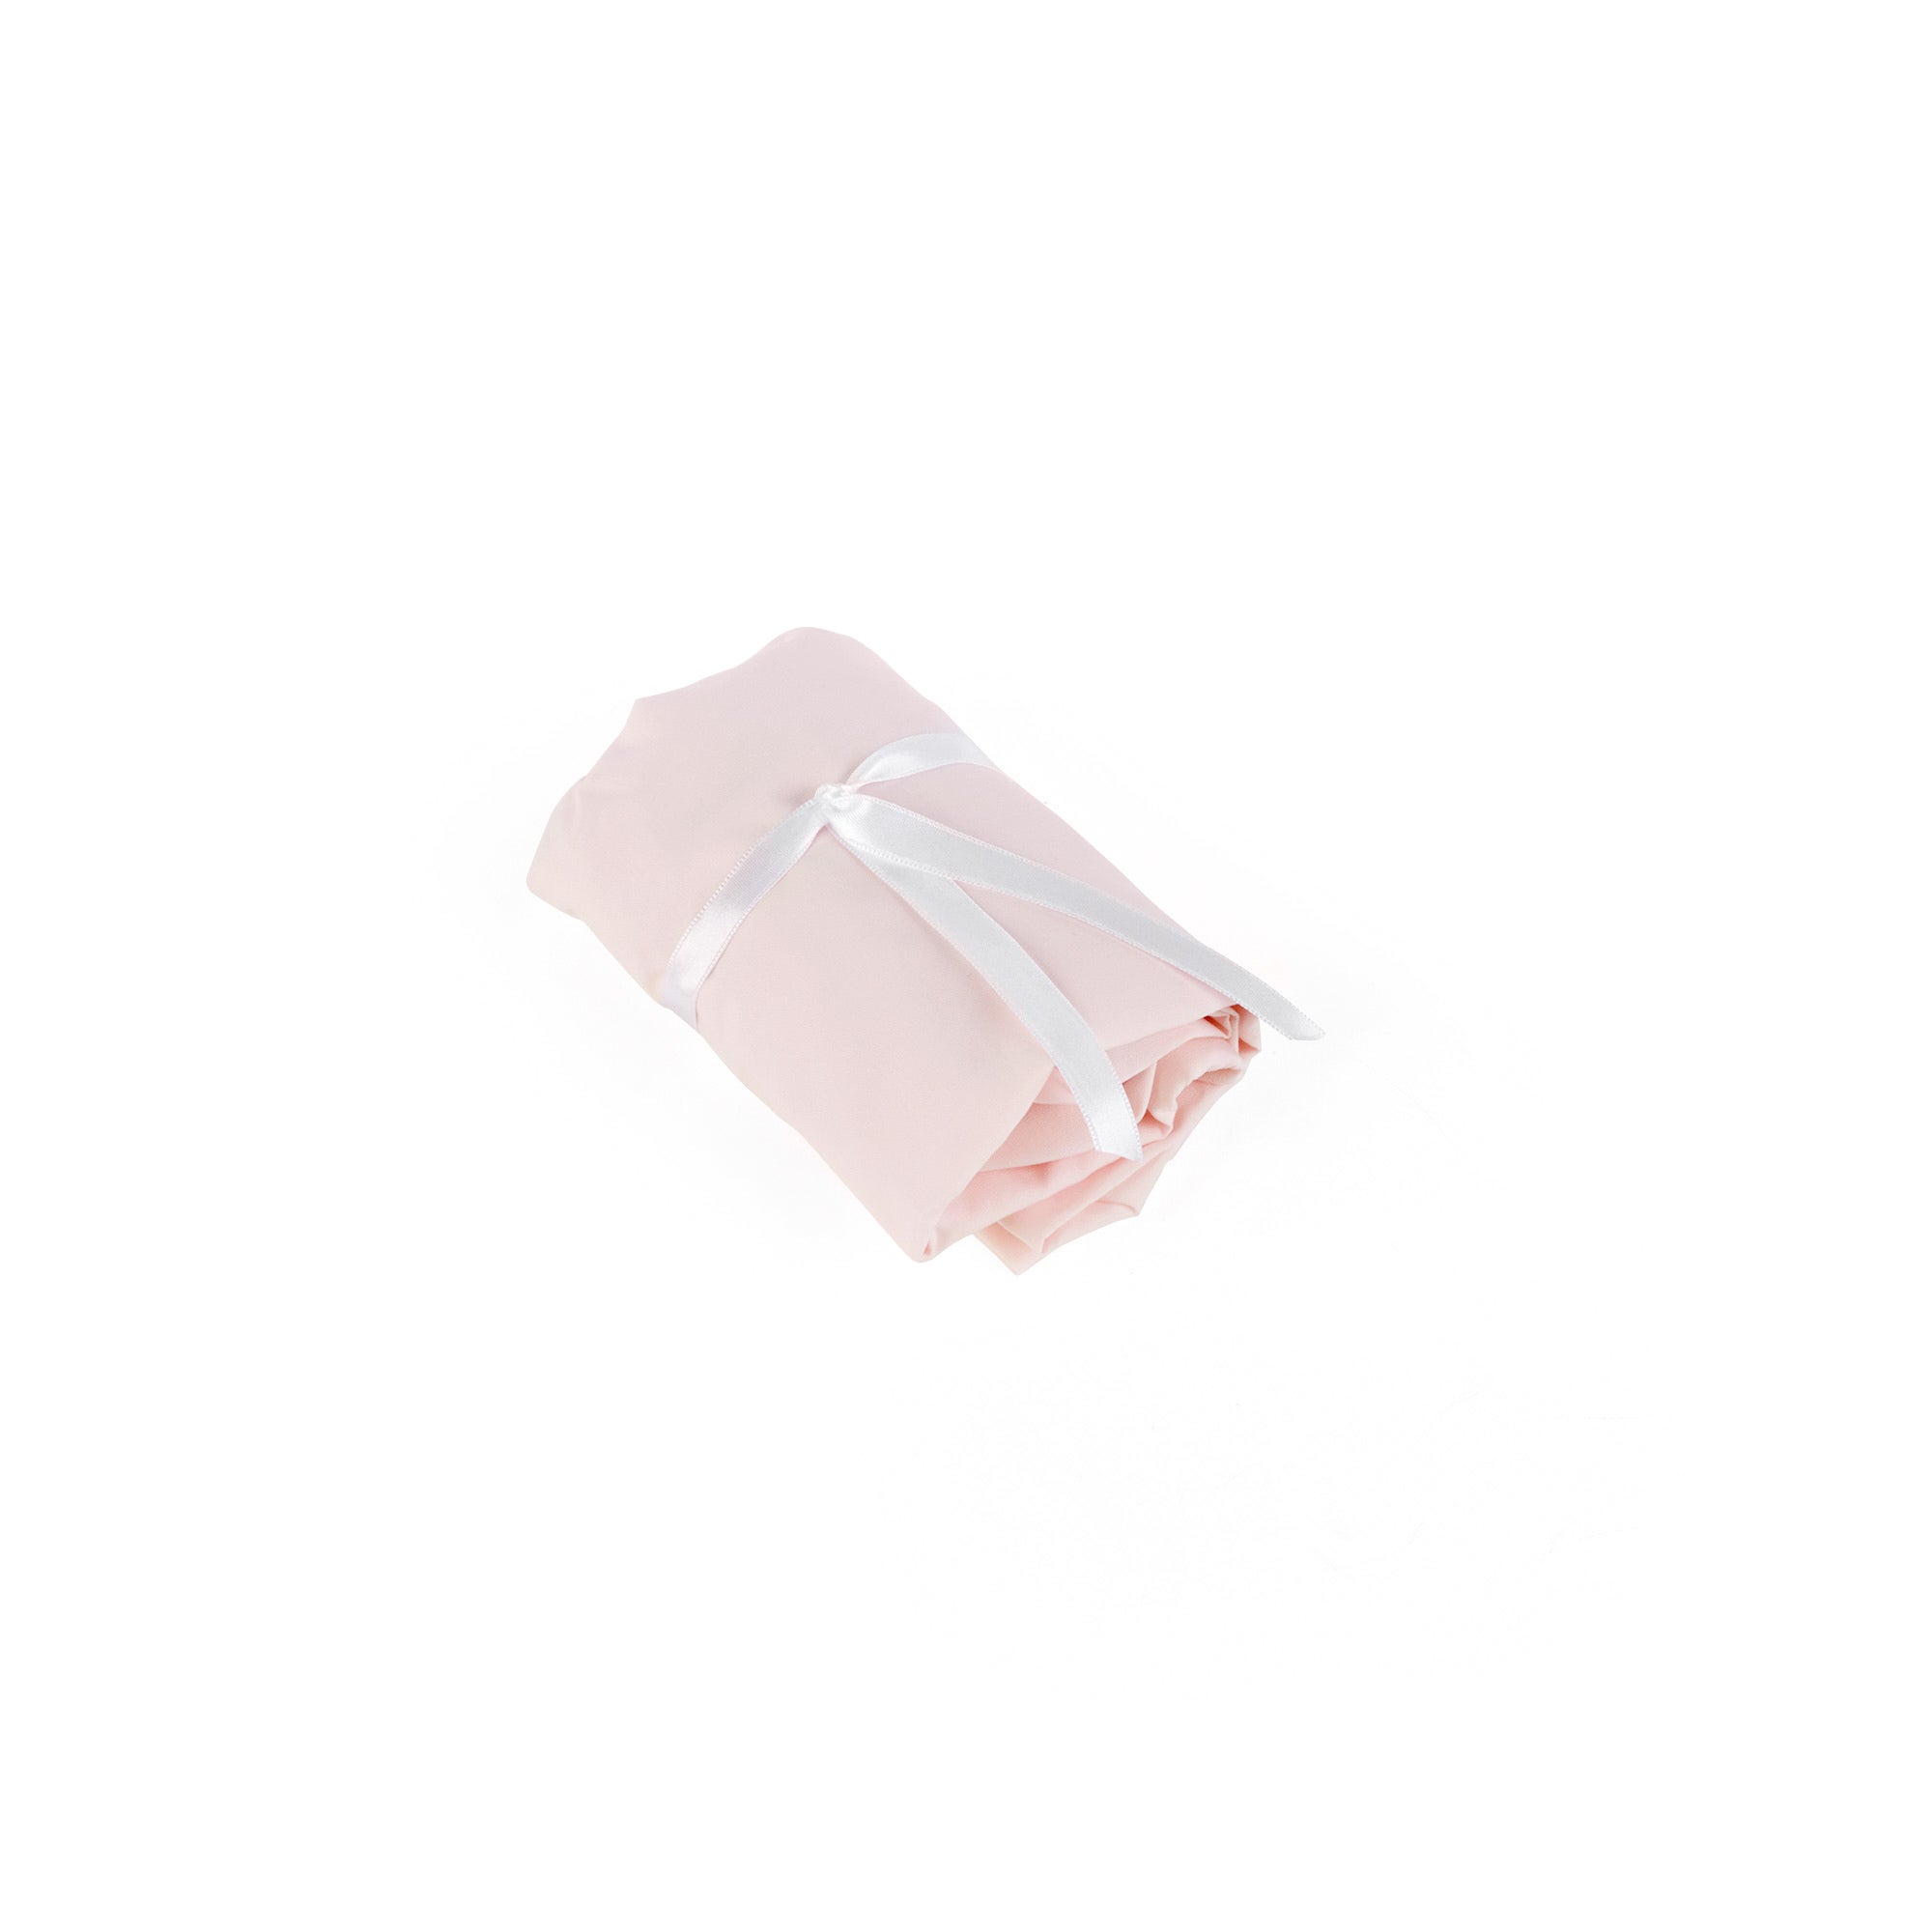 Theophile & Patachou Craddle Fitted Sheet - Cotton Pink